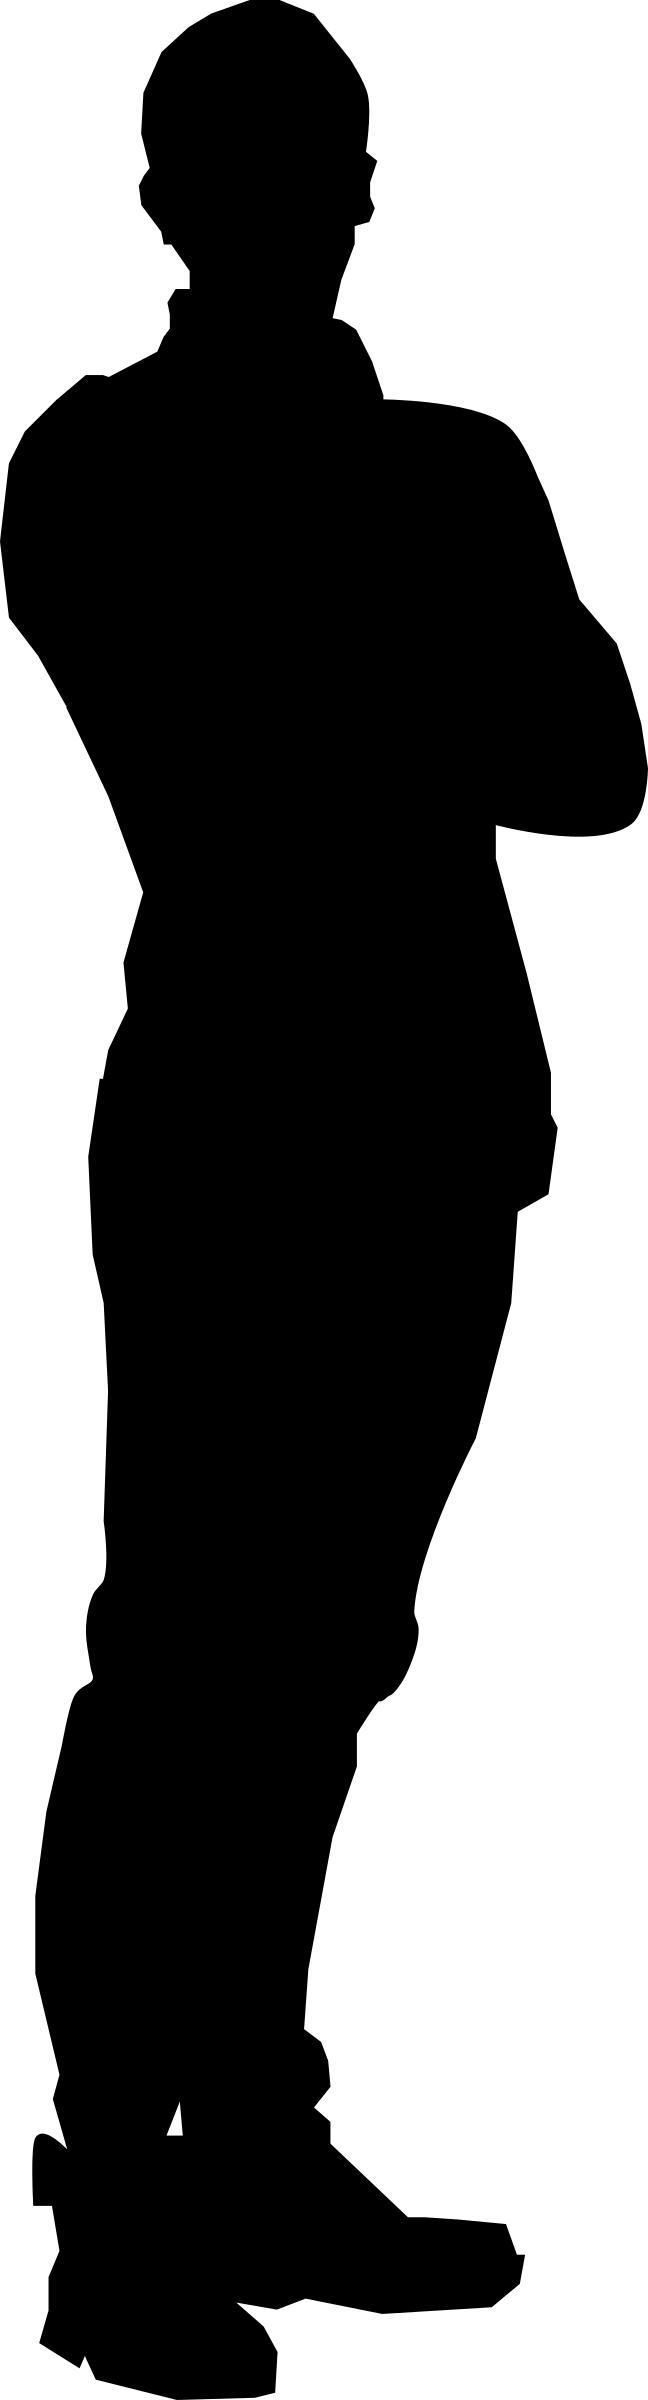 Arms Crossed png transparent